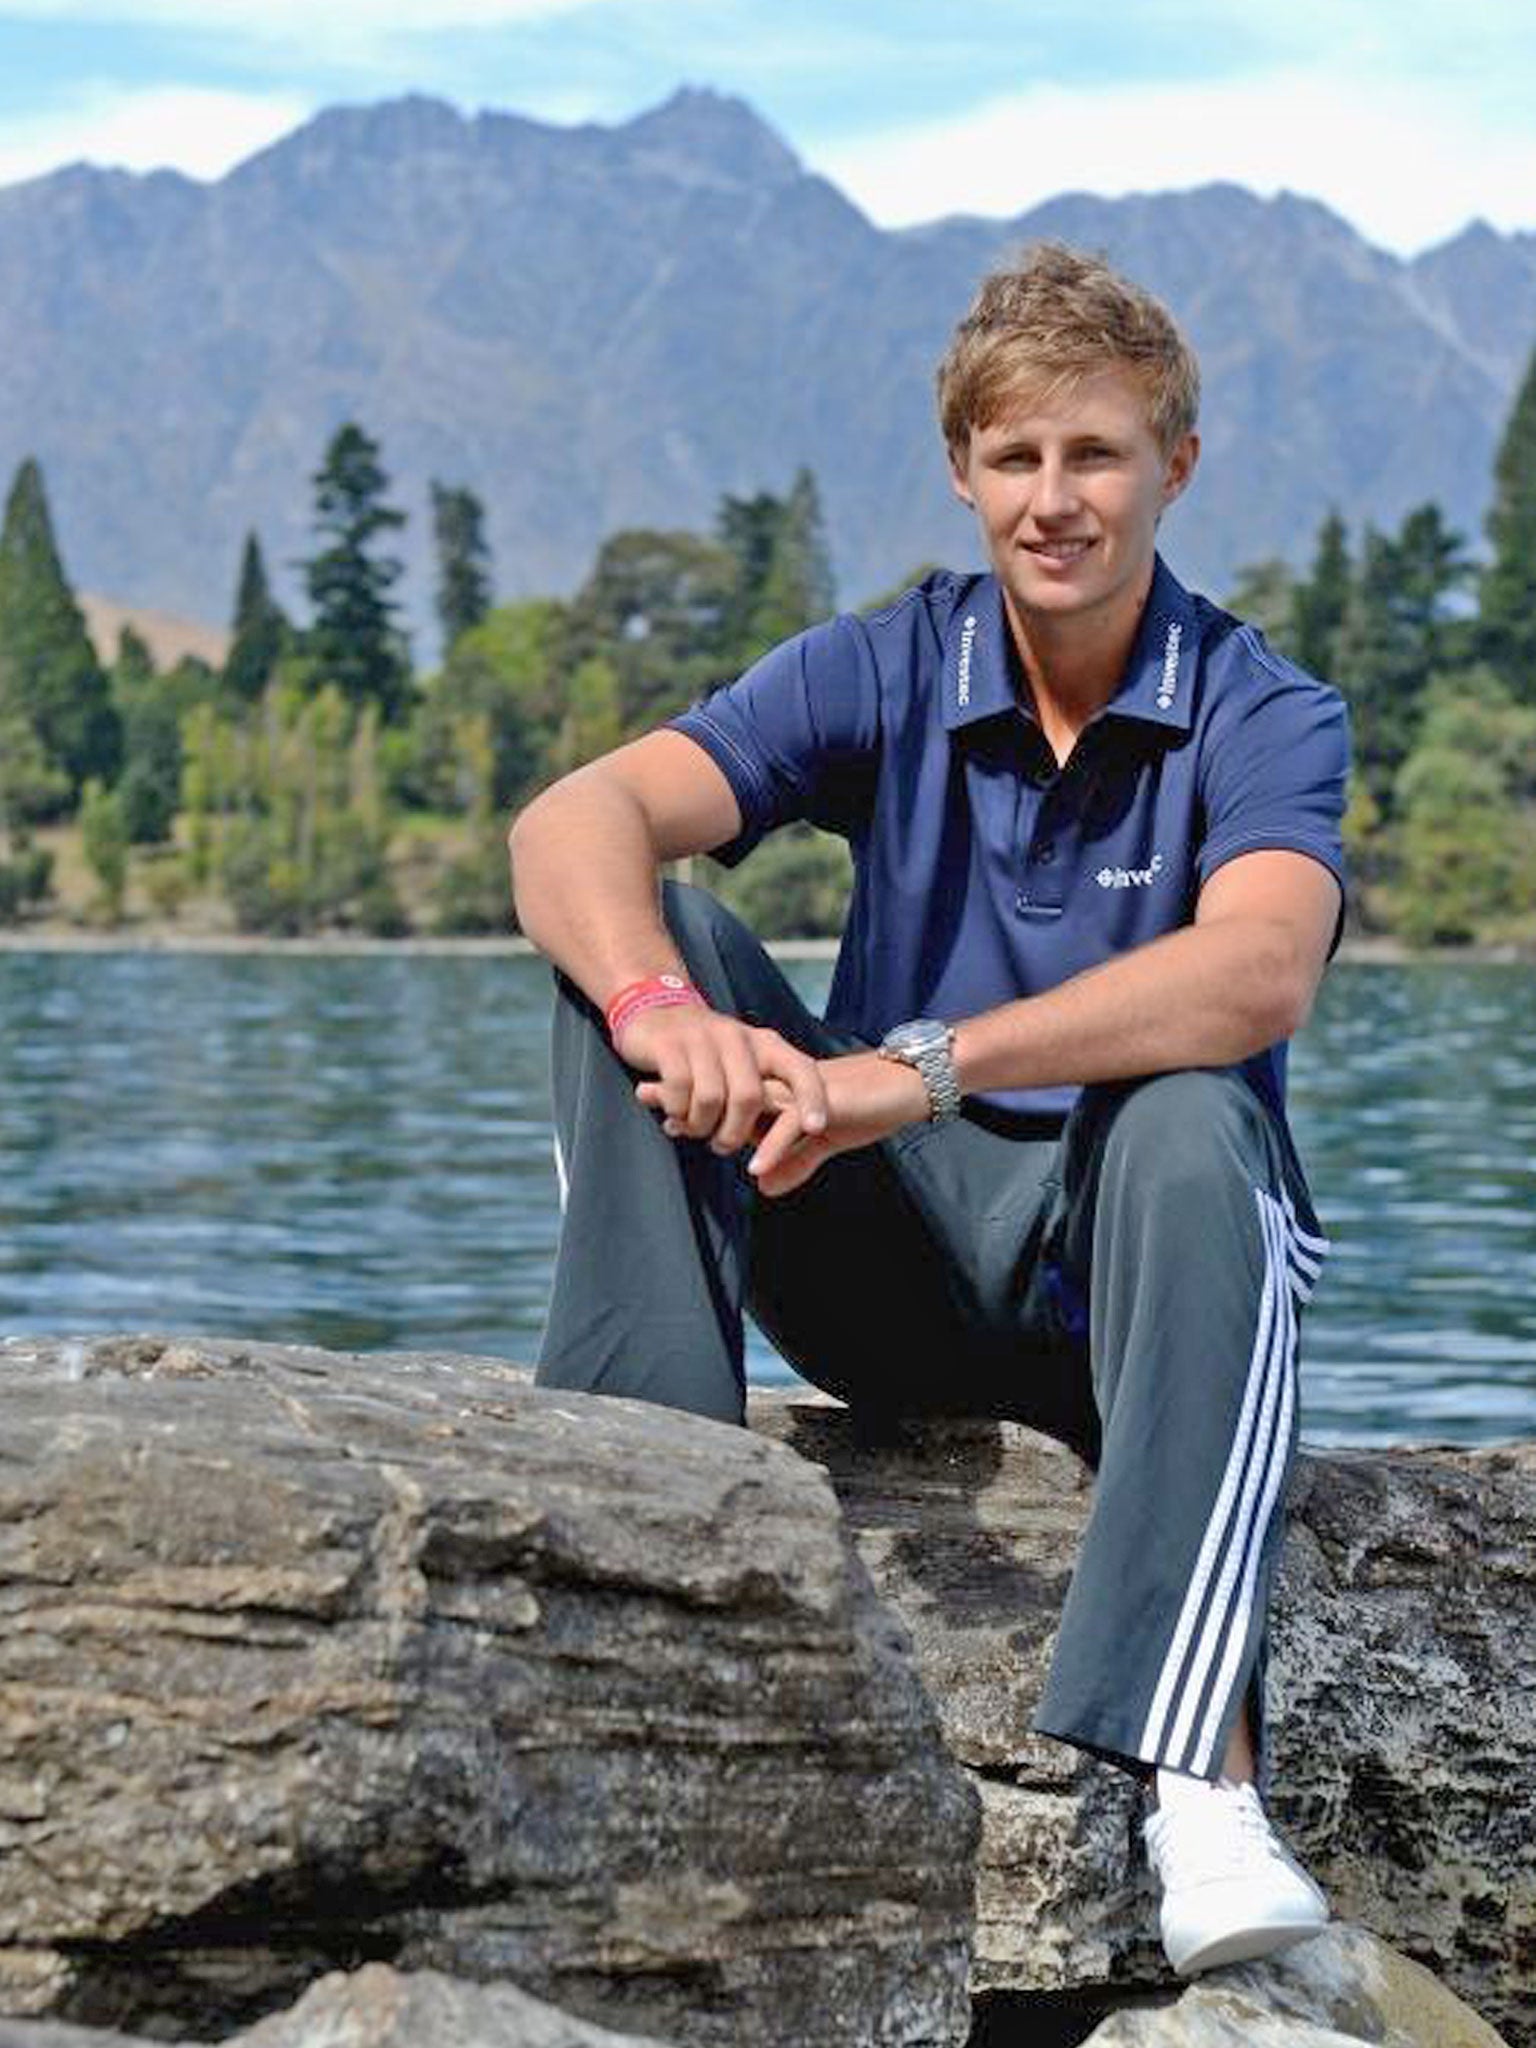 Joe Root at the Remarkables mountain range in Queenstown